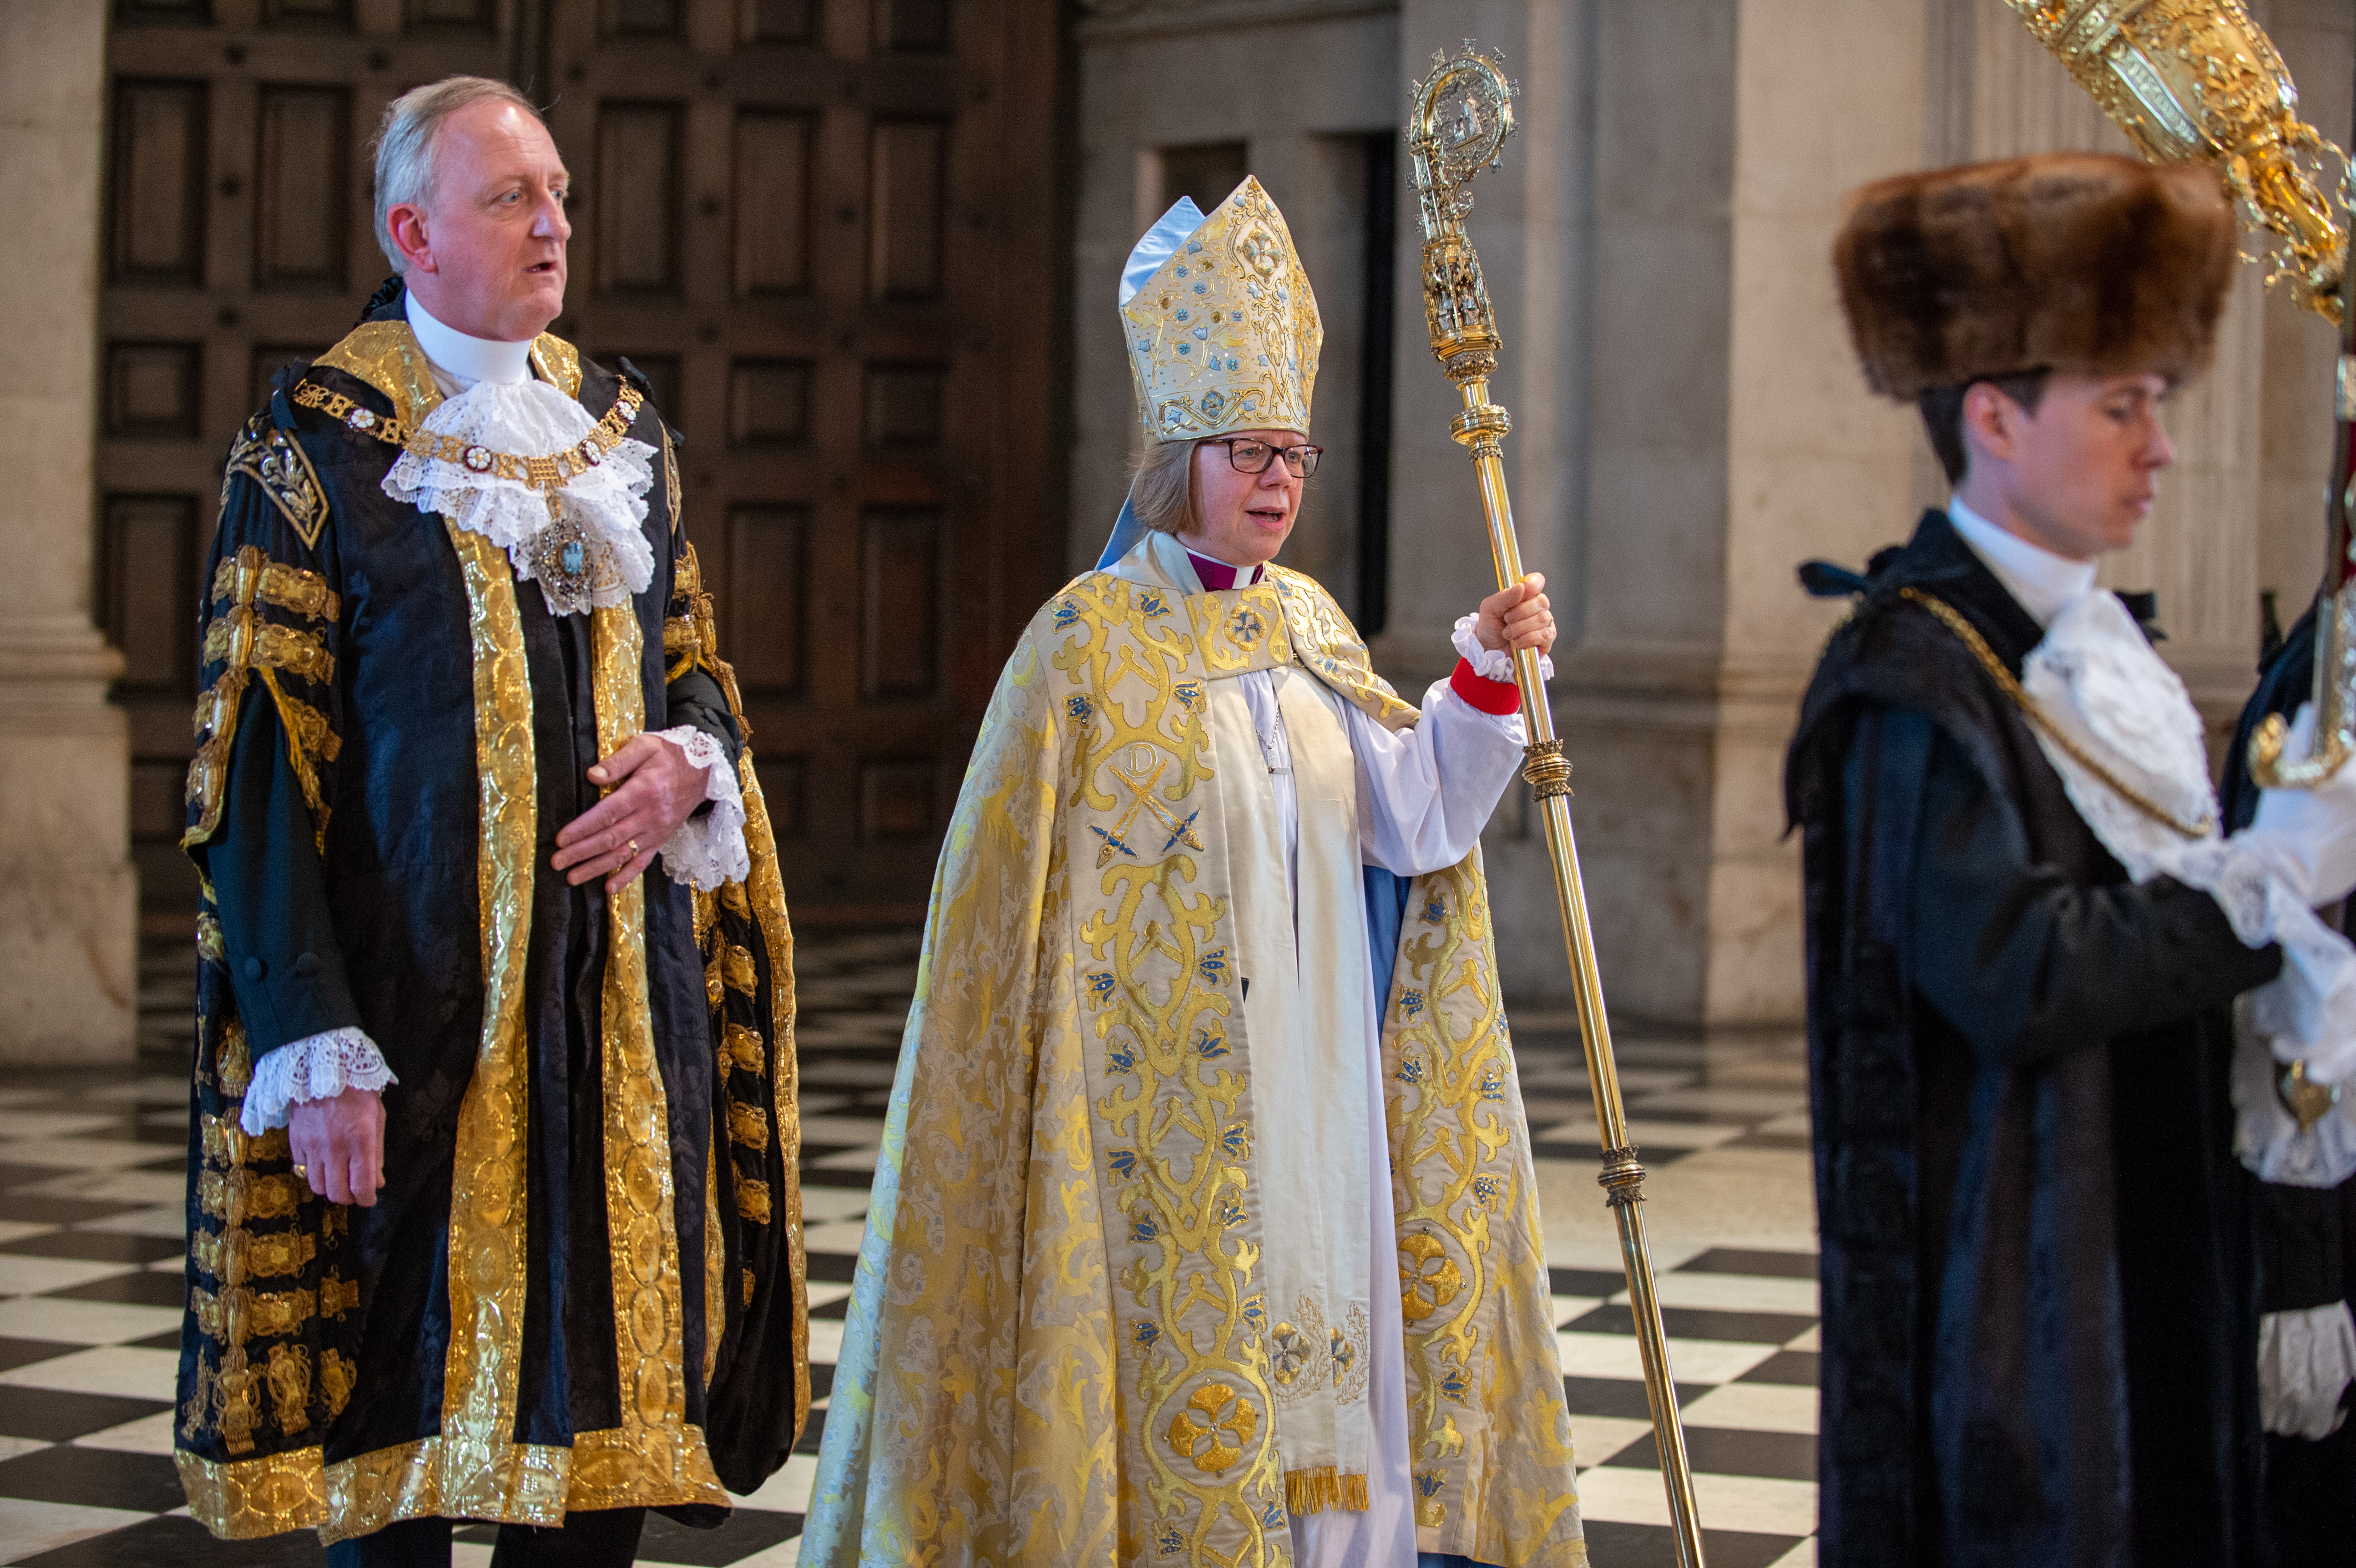 Festival 2019 - Lord Mayor and Bishop of London